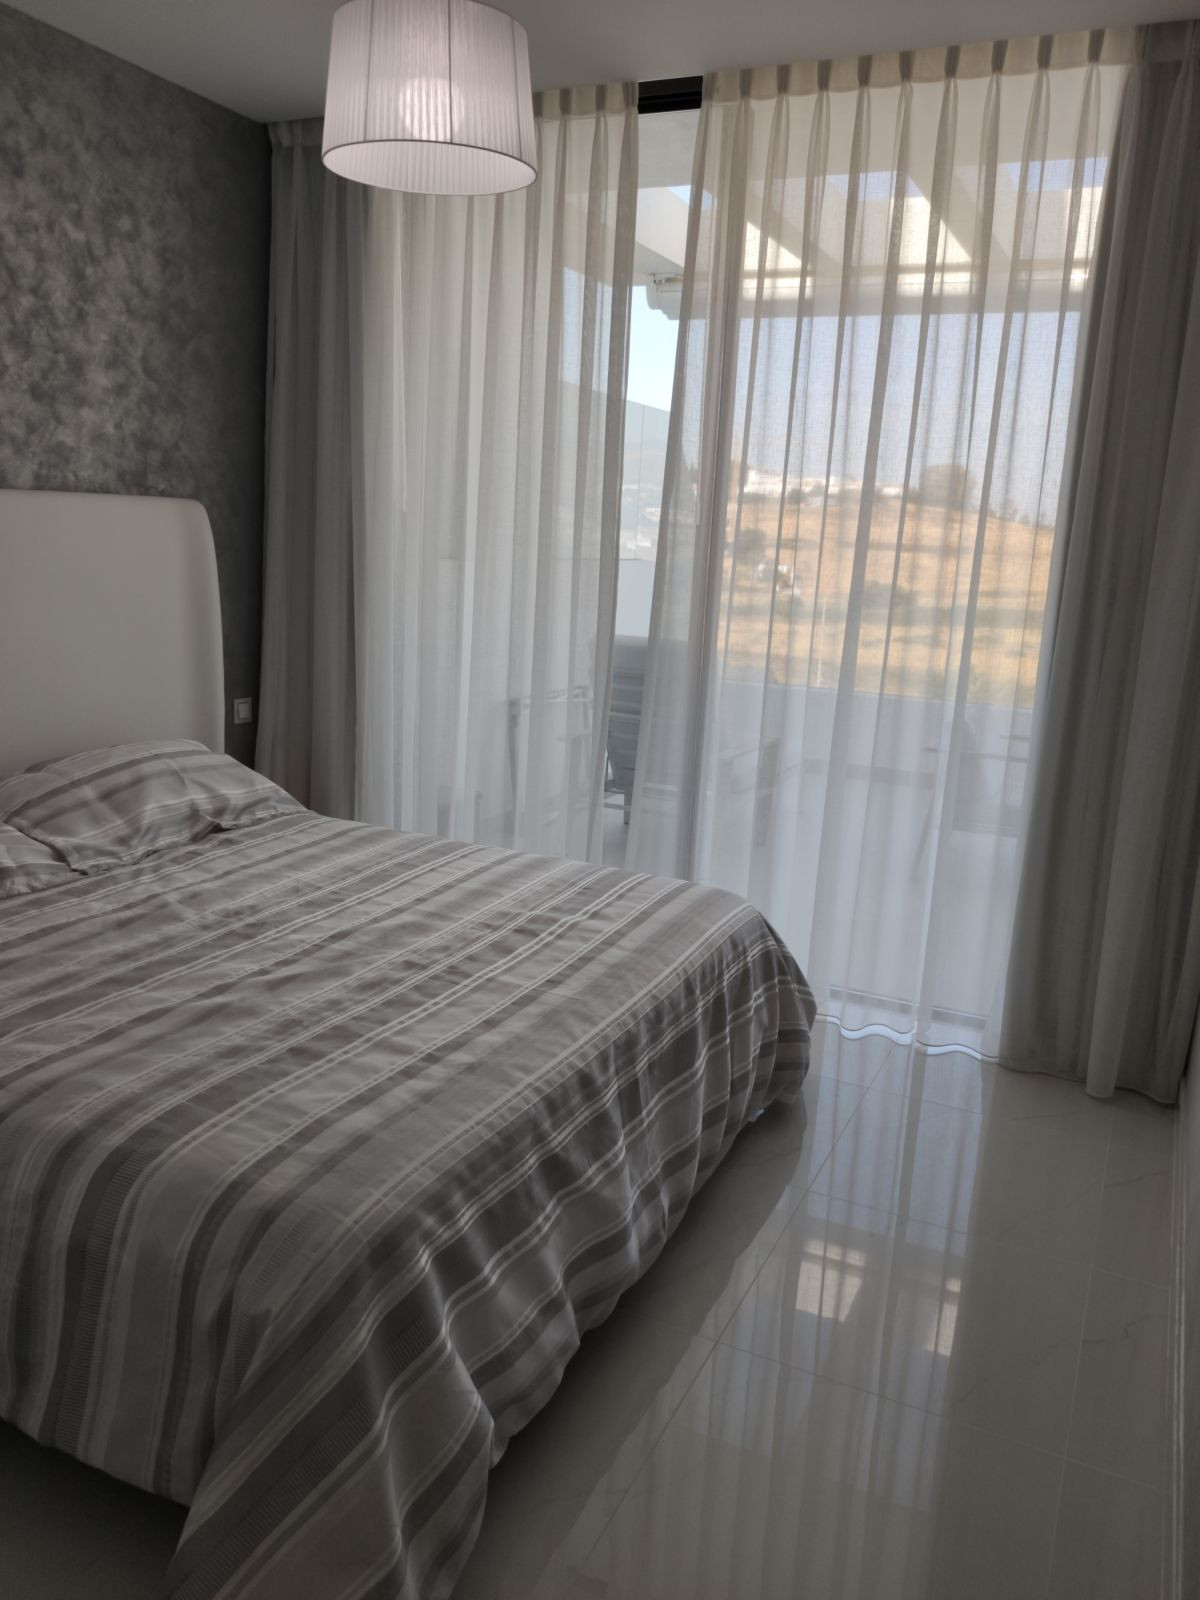 2 bed Property For Sale in Atalaya, Costa del Sol - thumb 10